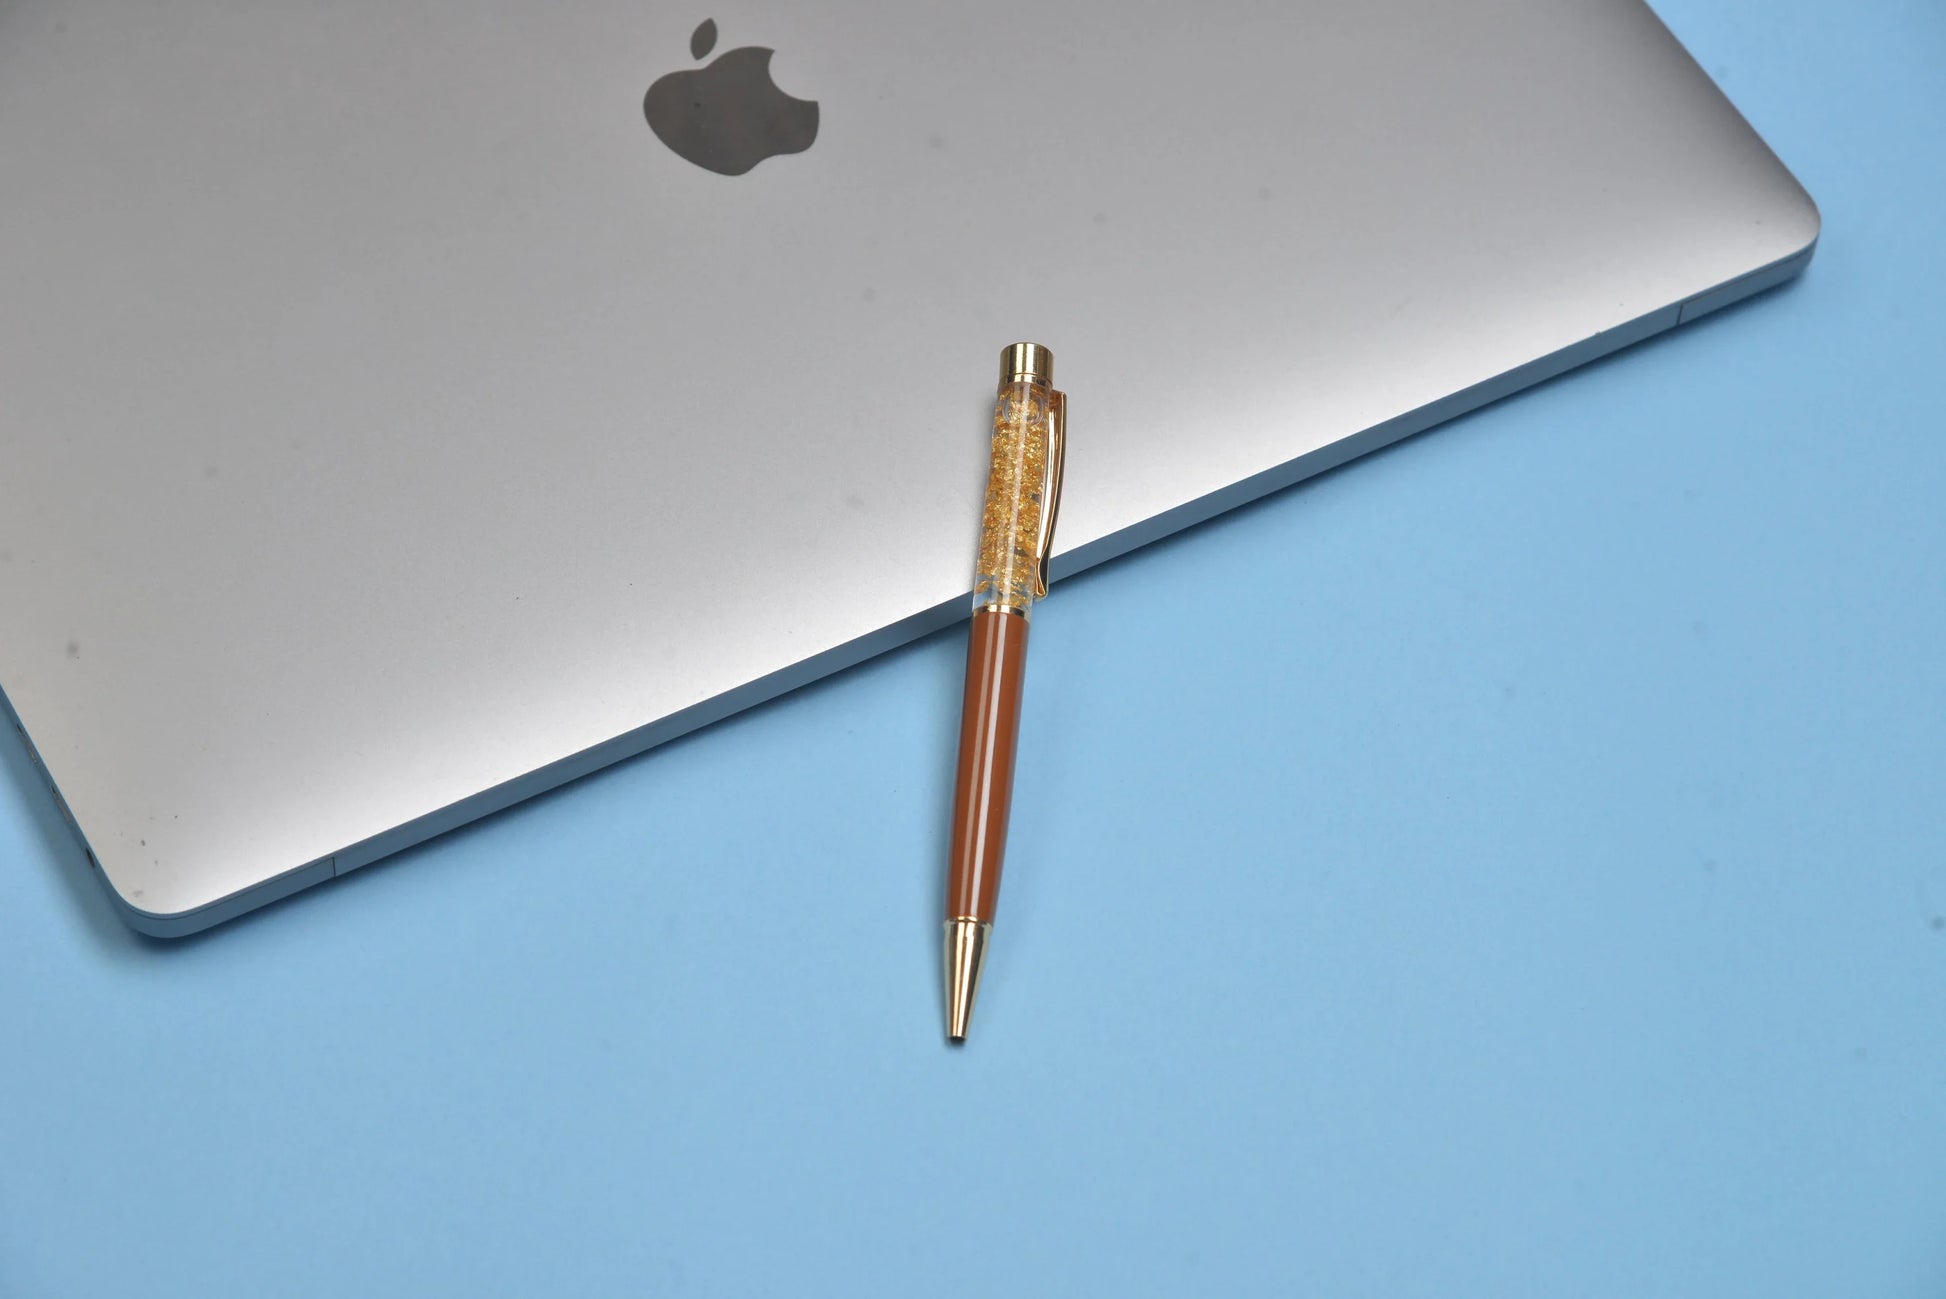 Use this personalised pen to write your fantastic destiny.